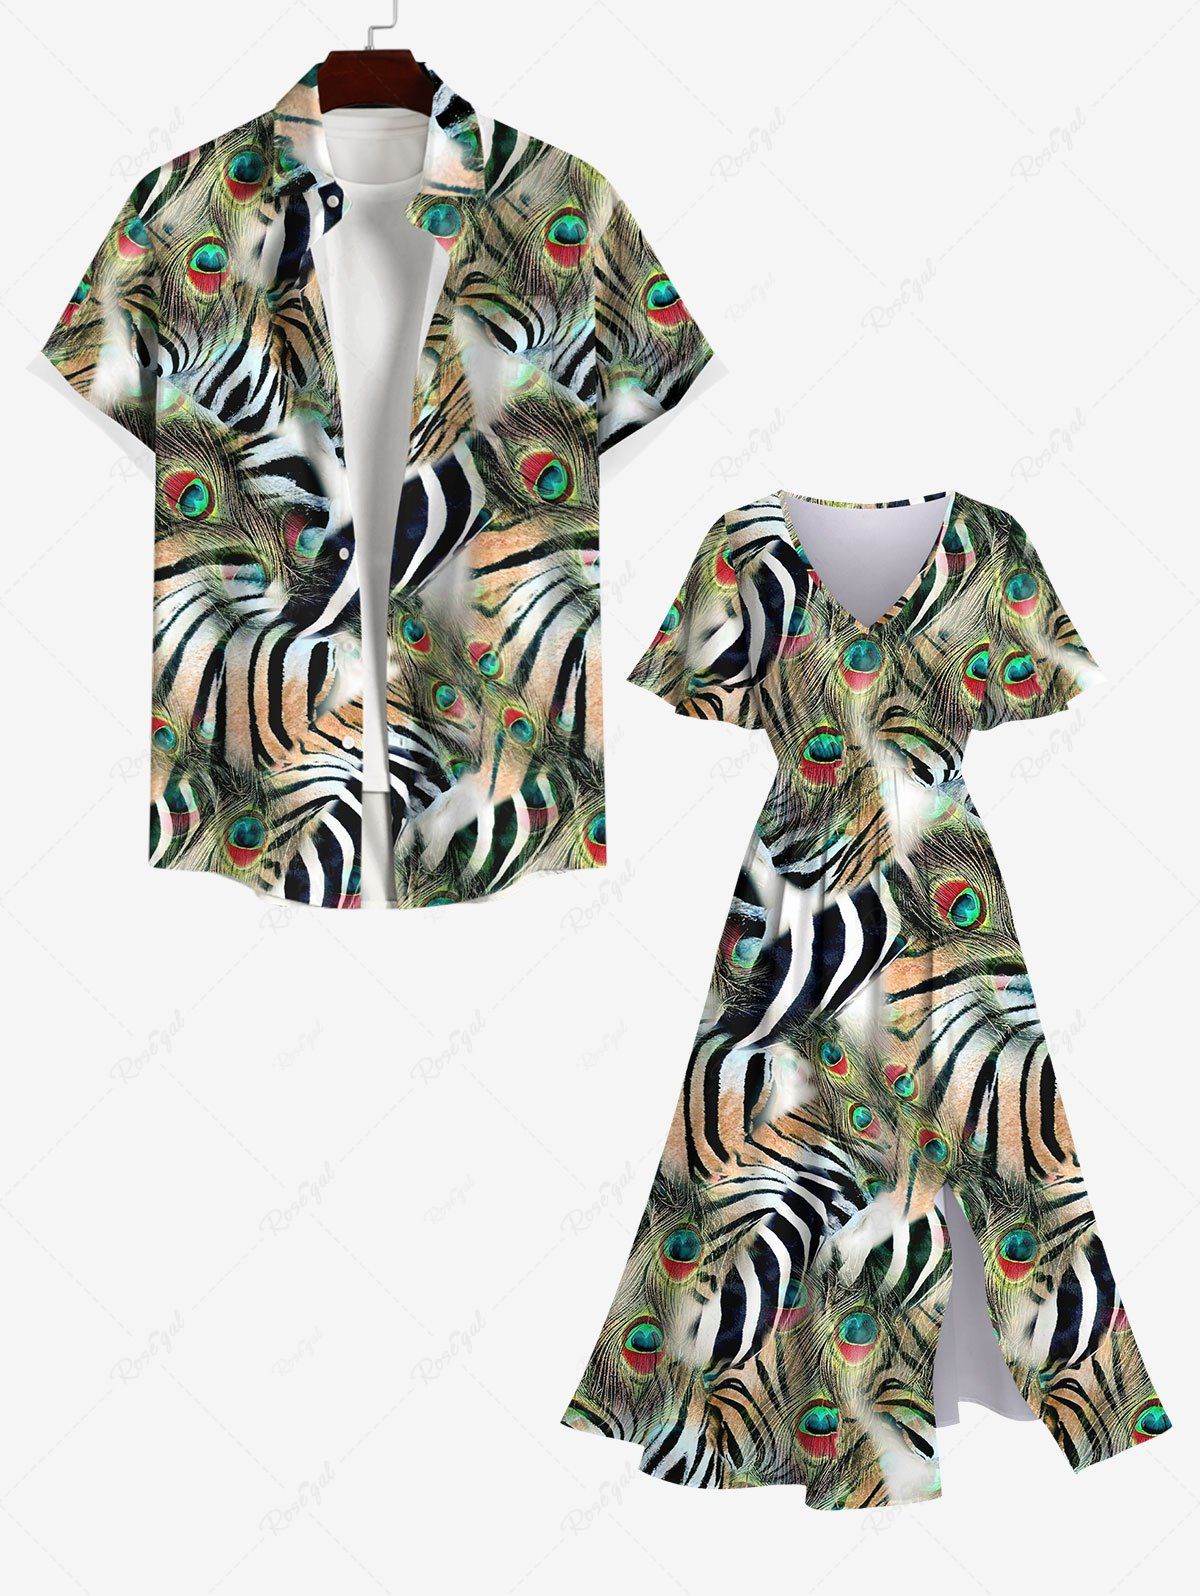 Latest Peacock Feather Tiger Zebra Striped Print Split Dress and Button Shirt Plus Size Matching Hawaii Beach Outfit for Couples  